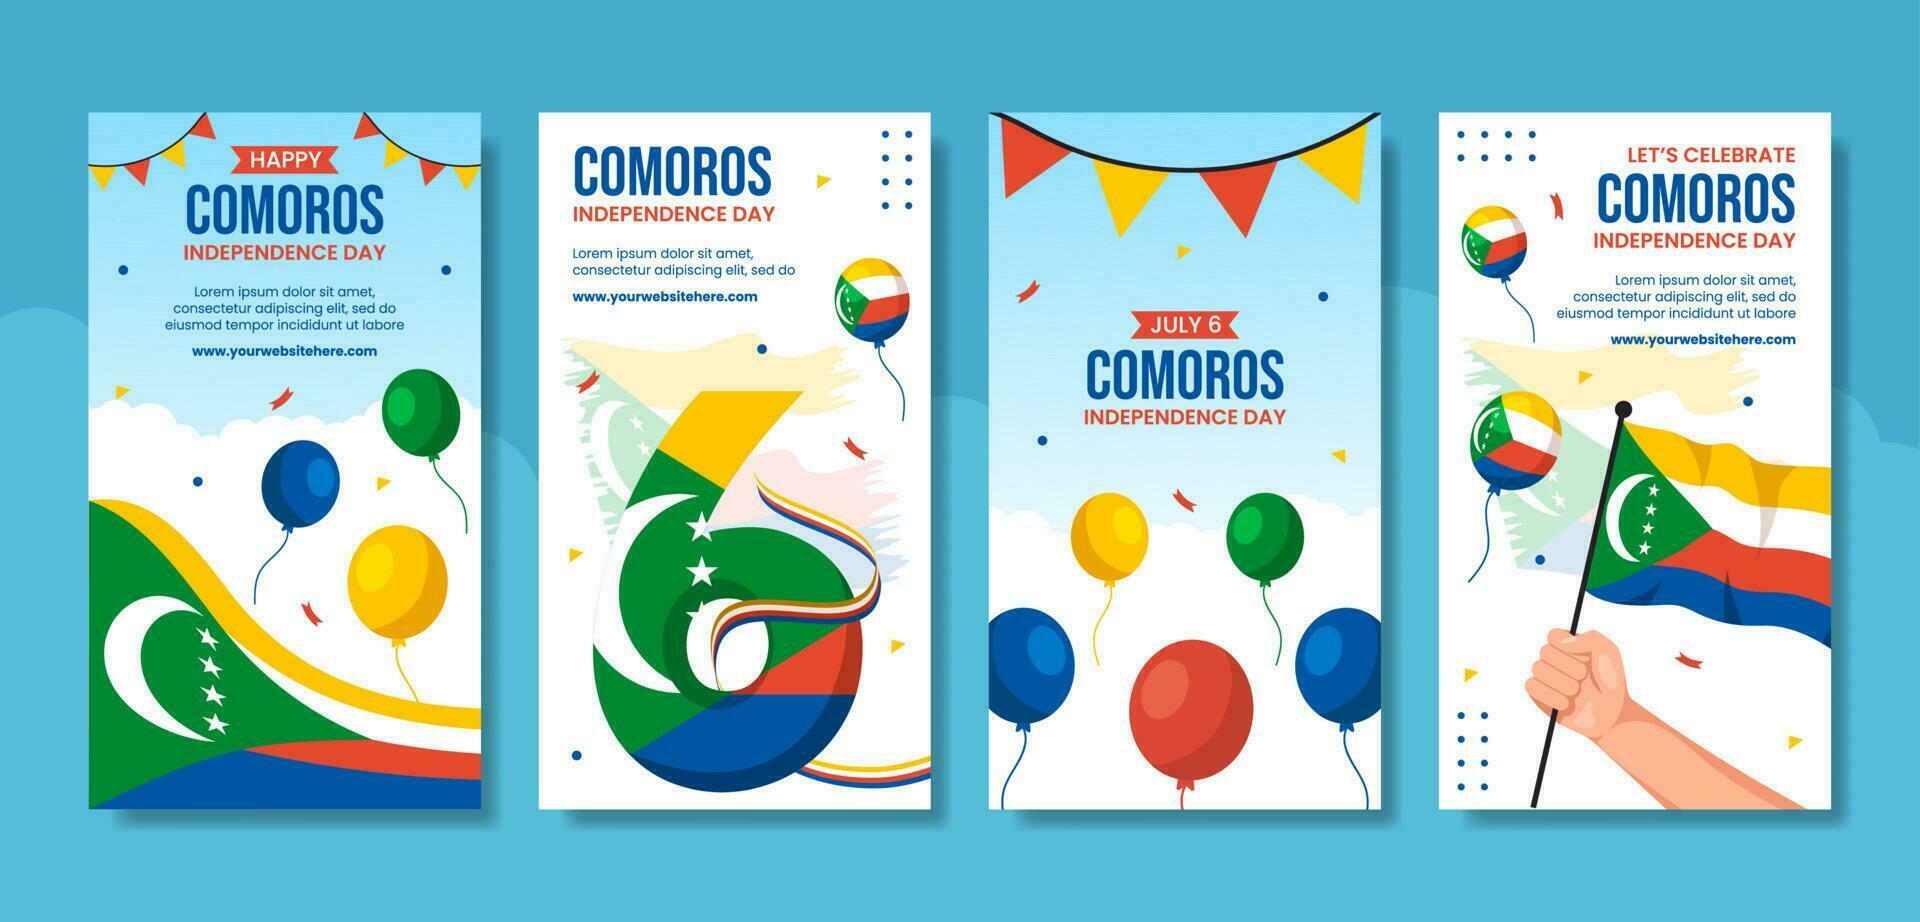 Happy Comoros Independence Day Social Media Stories Illustration Cartoon Hand Drawn Templates Background vector